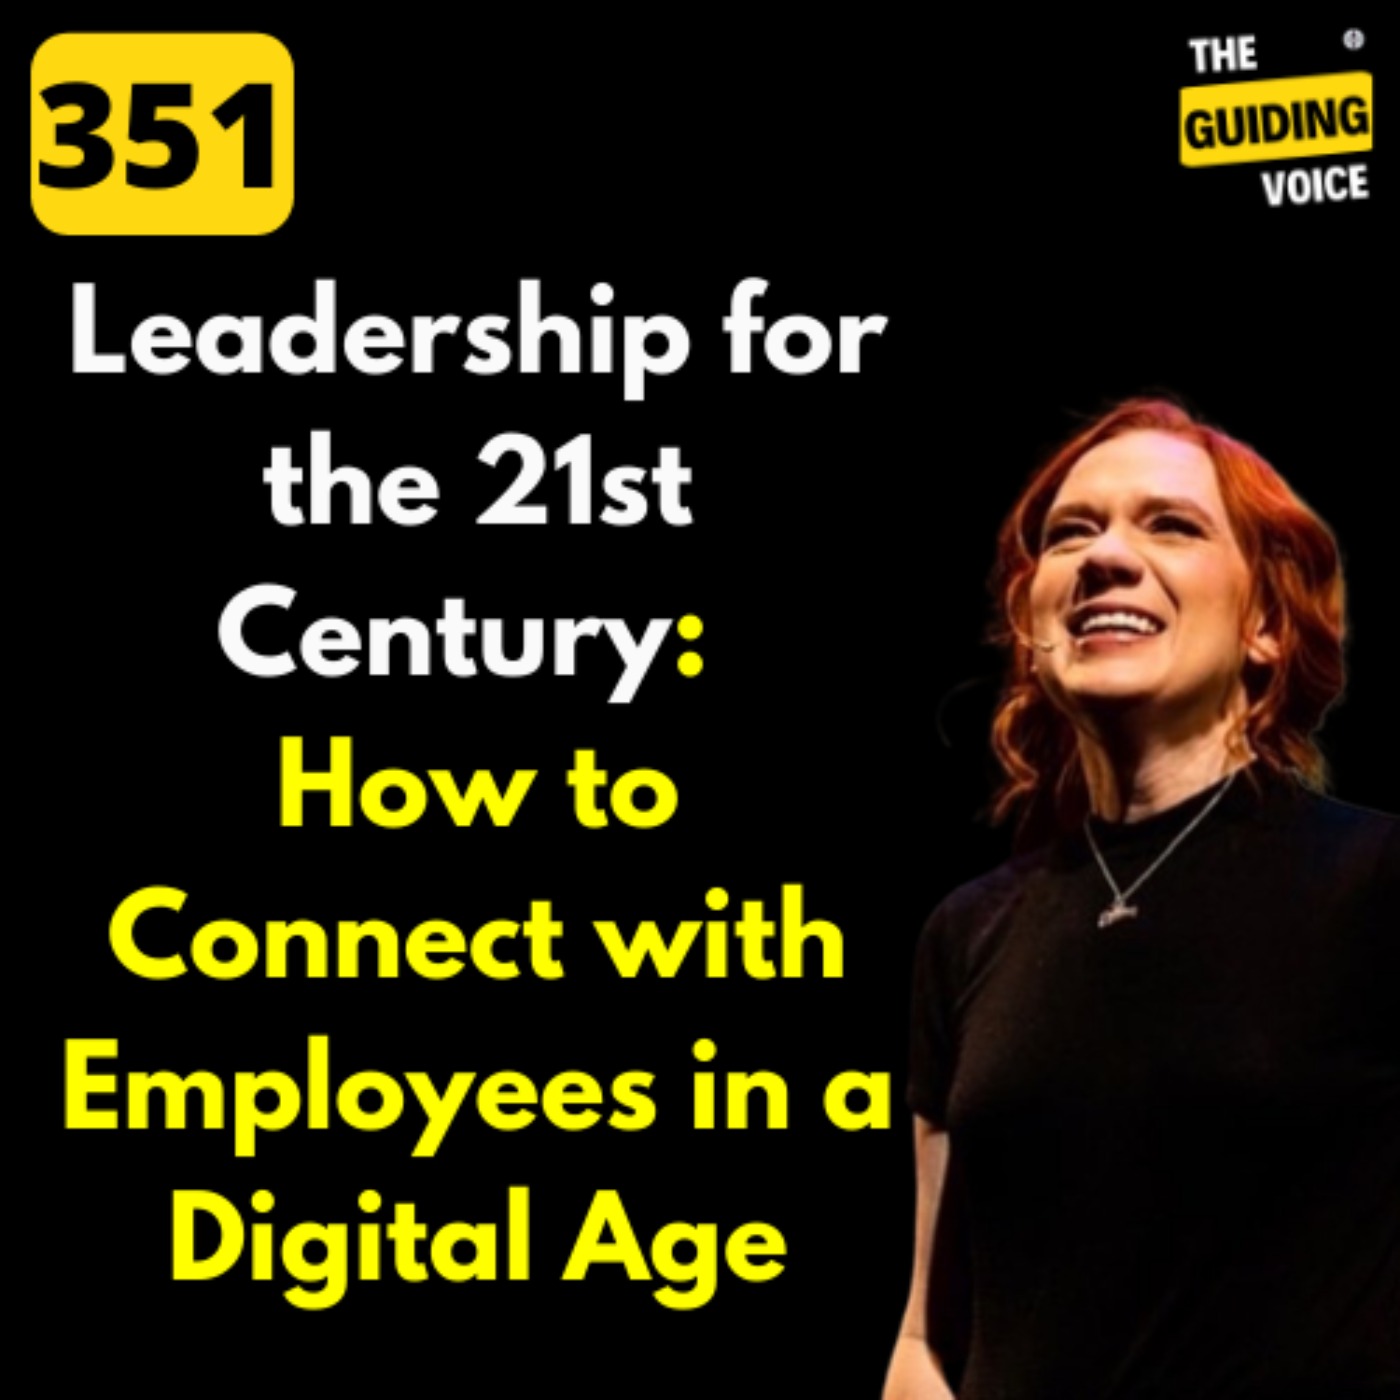 Leadership for the 21st Century: Connect with Employees in a Digital Age | Melissa Boggs | #TGV351